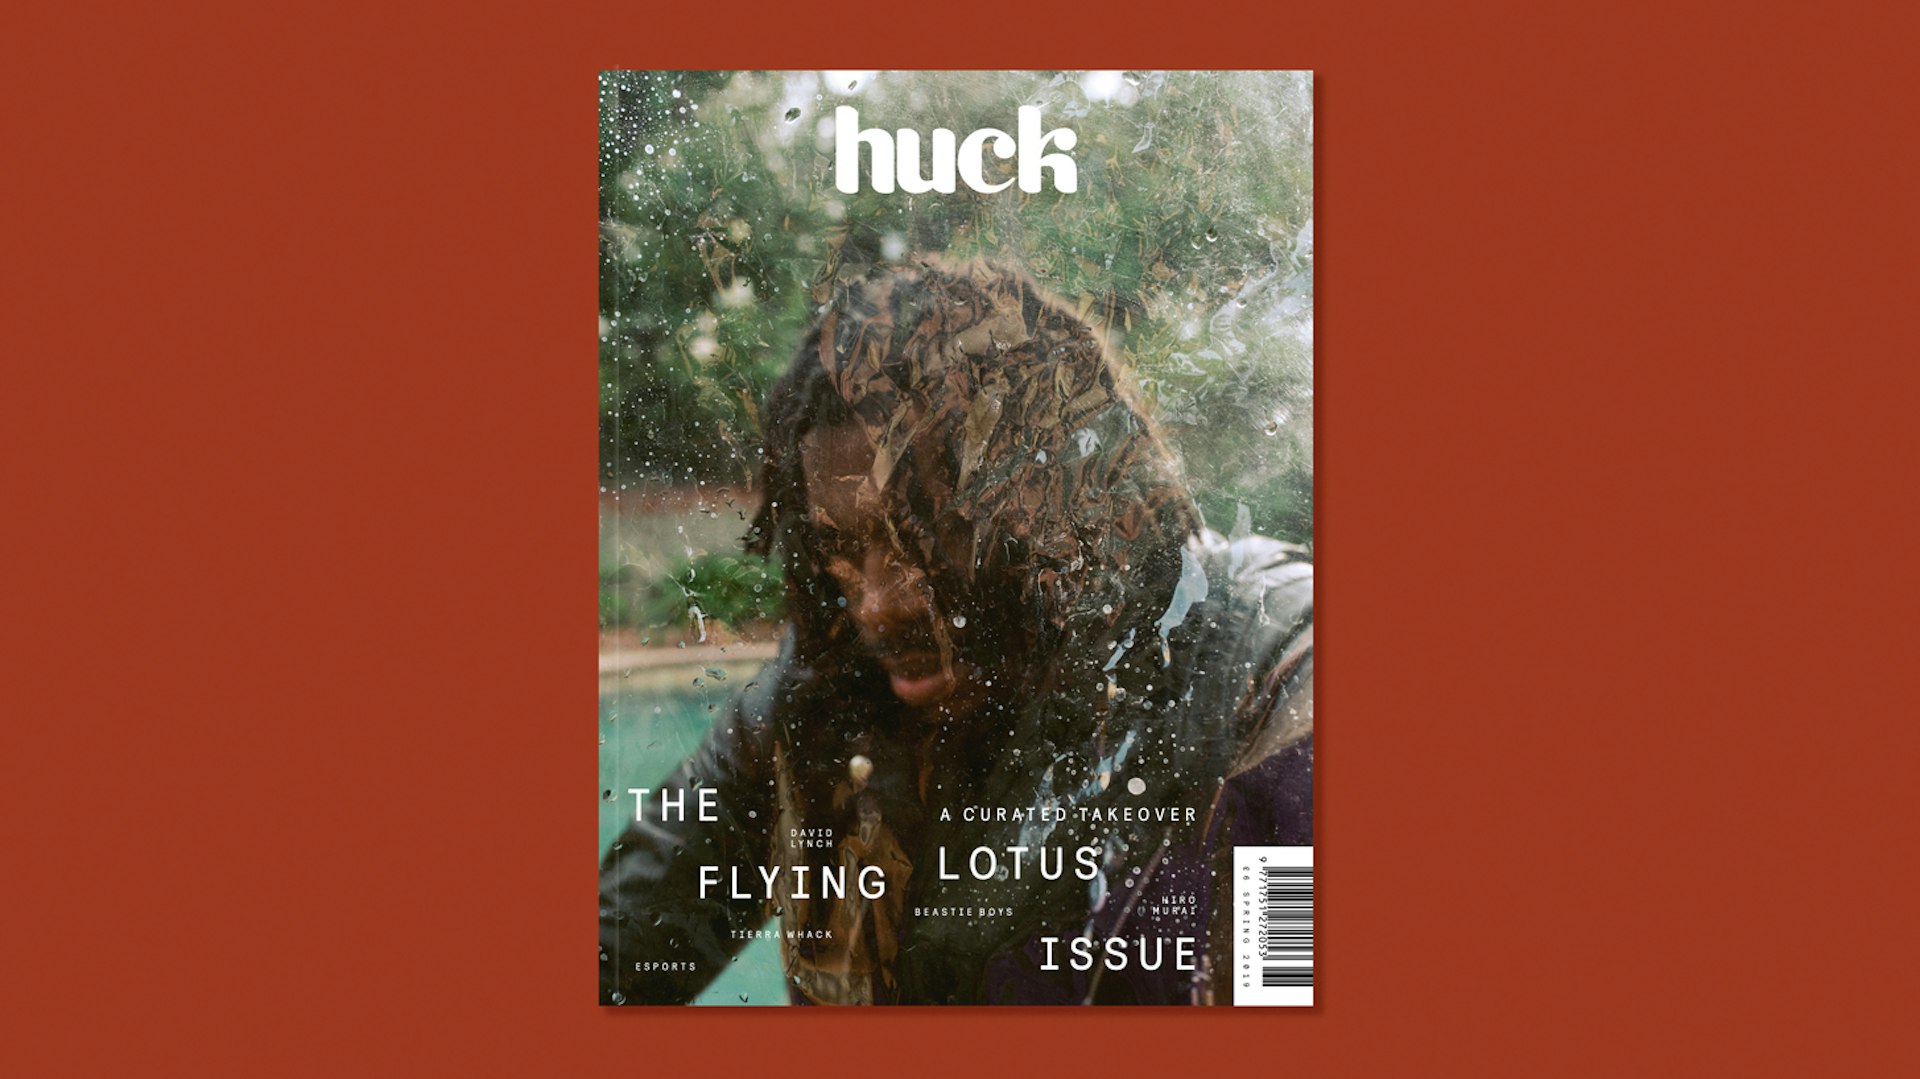 Huck: The Flying Lotus Issue